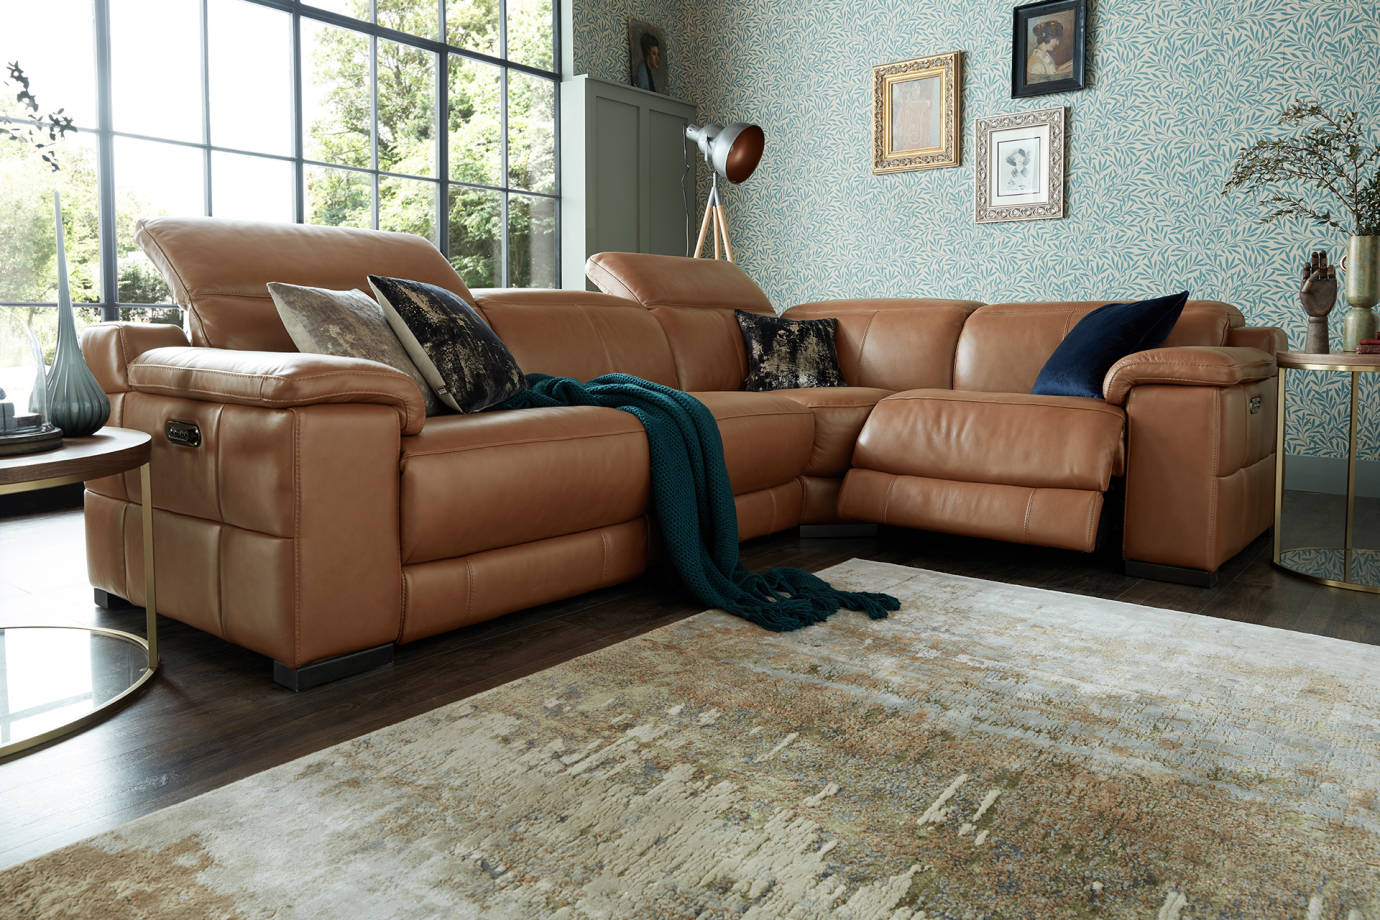 Recliner Sofas Leather Fabric And, Brown Leather Reclining Couch